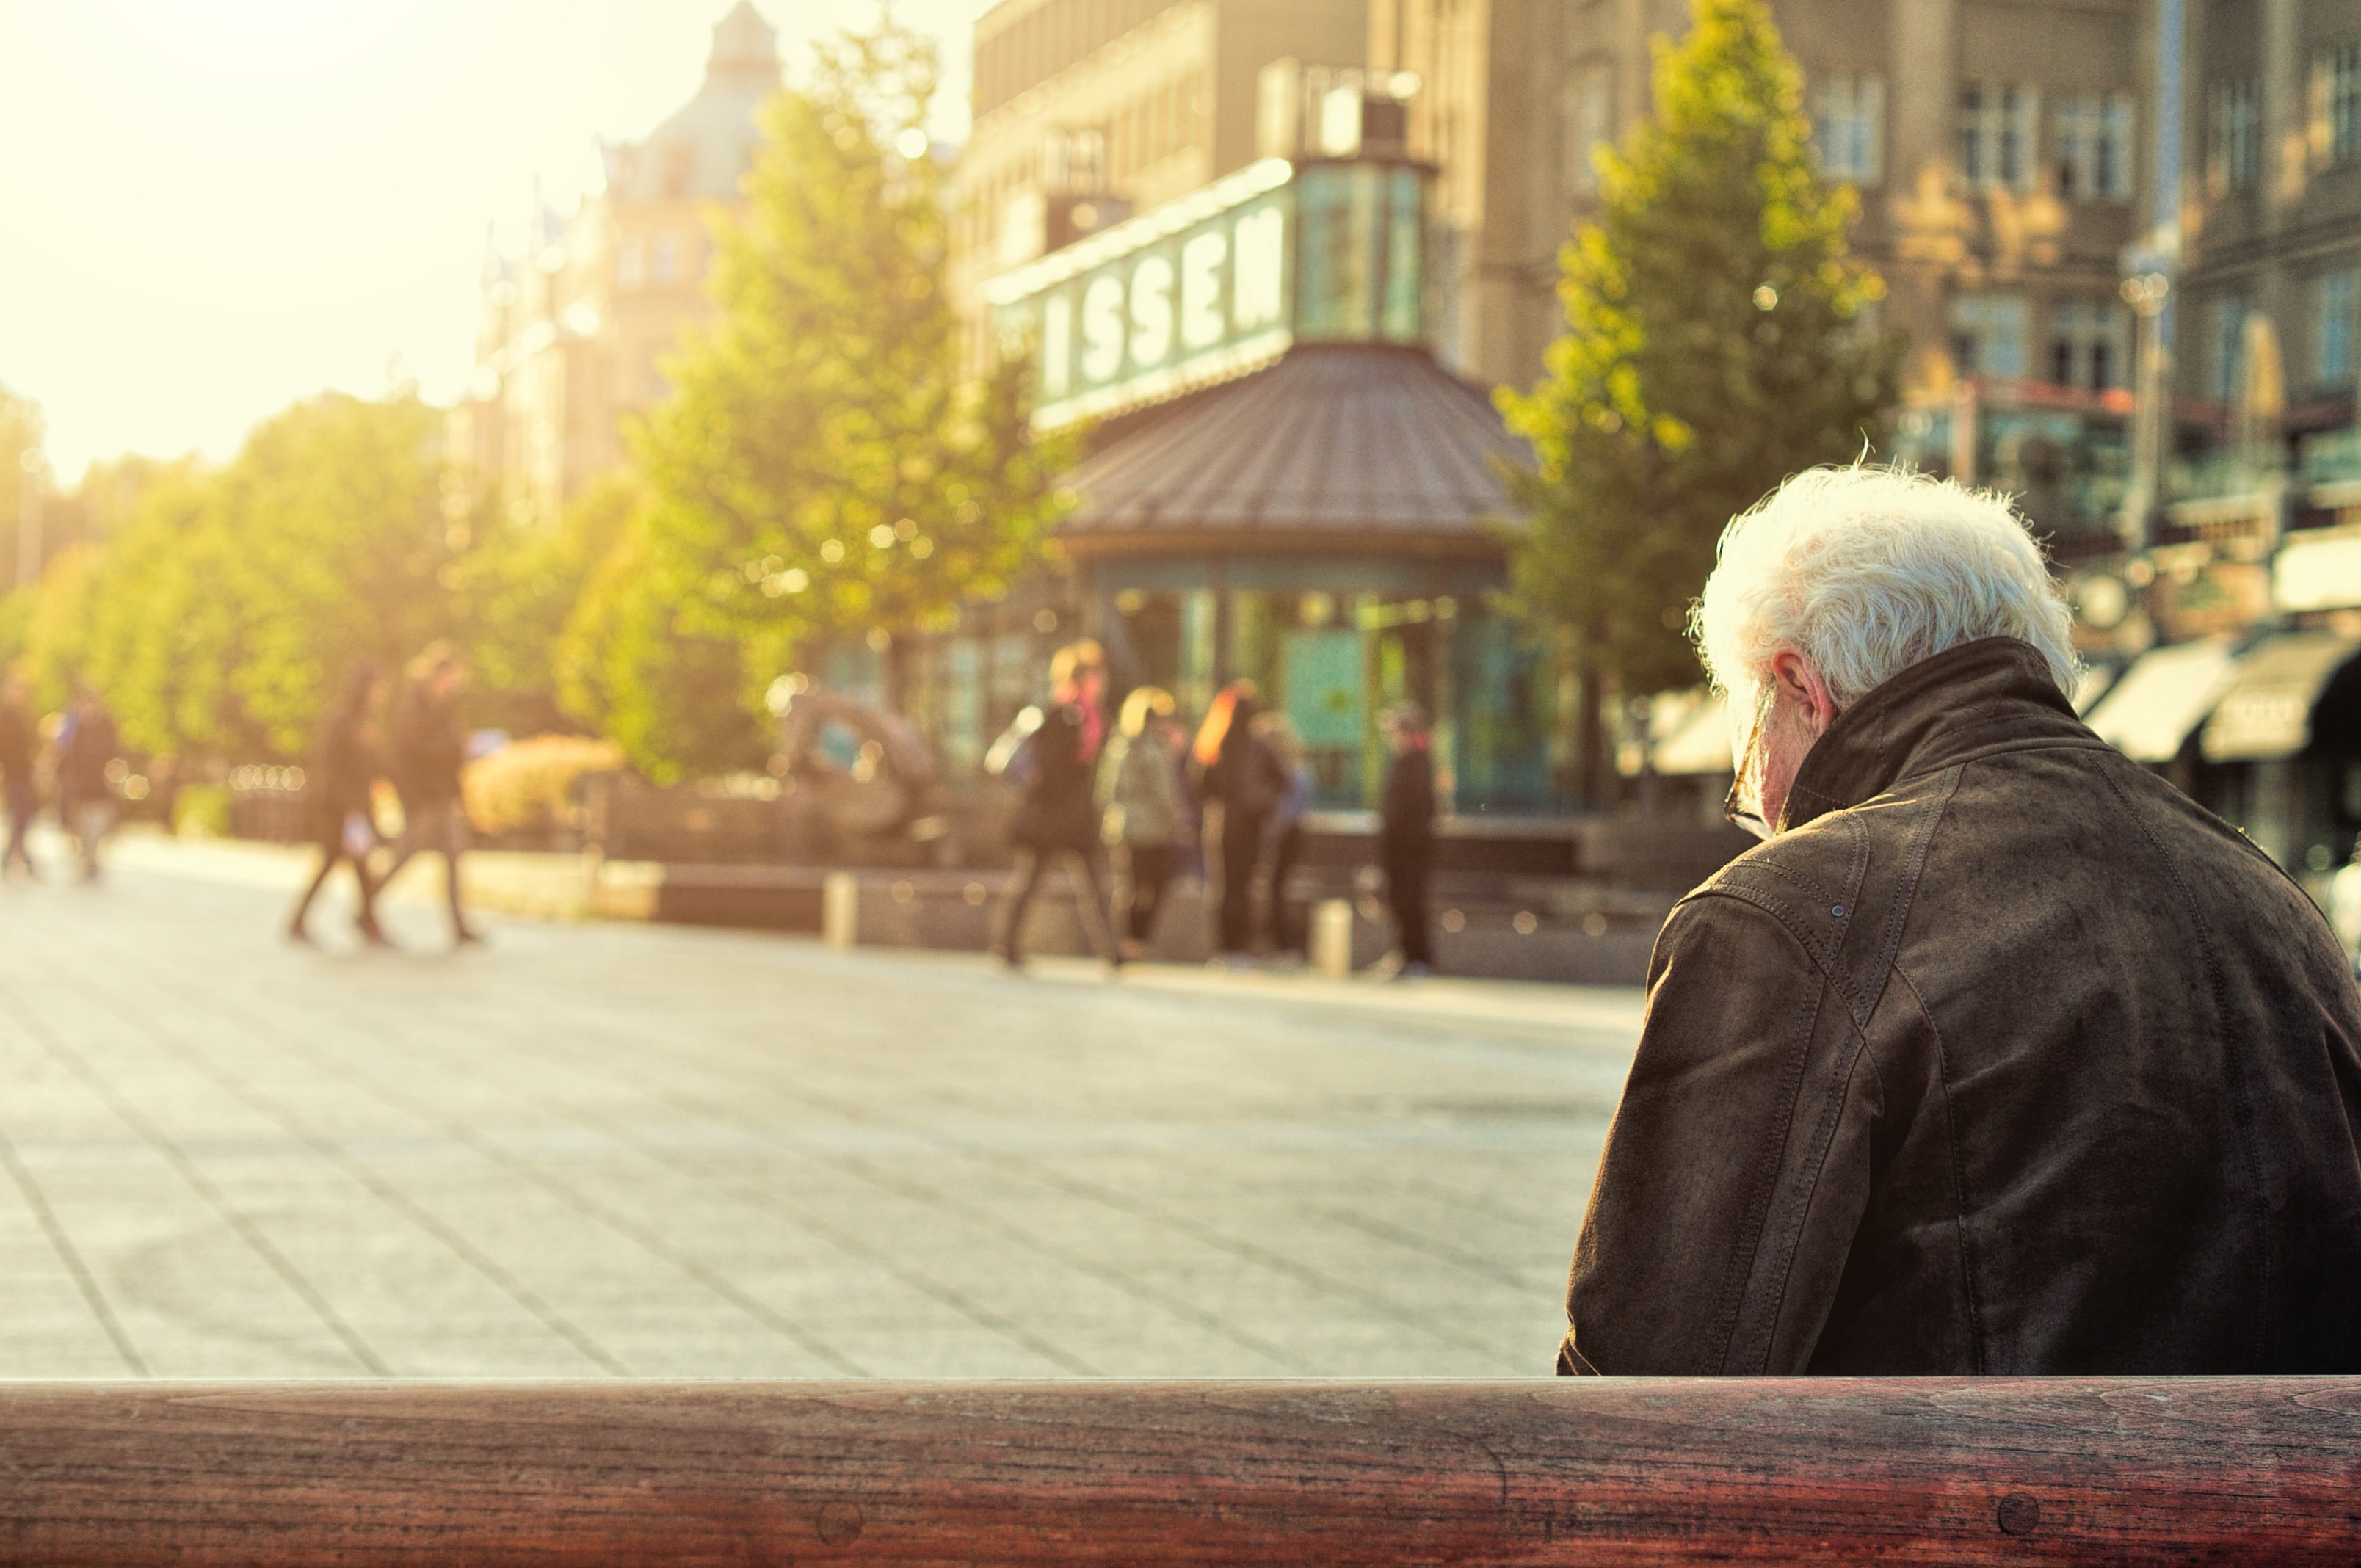 A man sits alone on a bench in a crowded high street